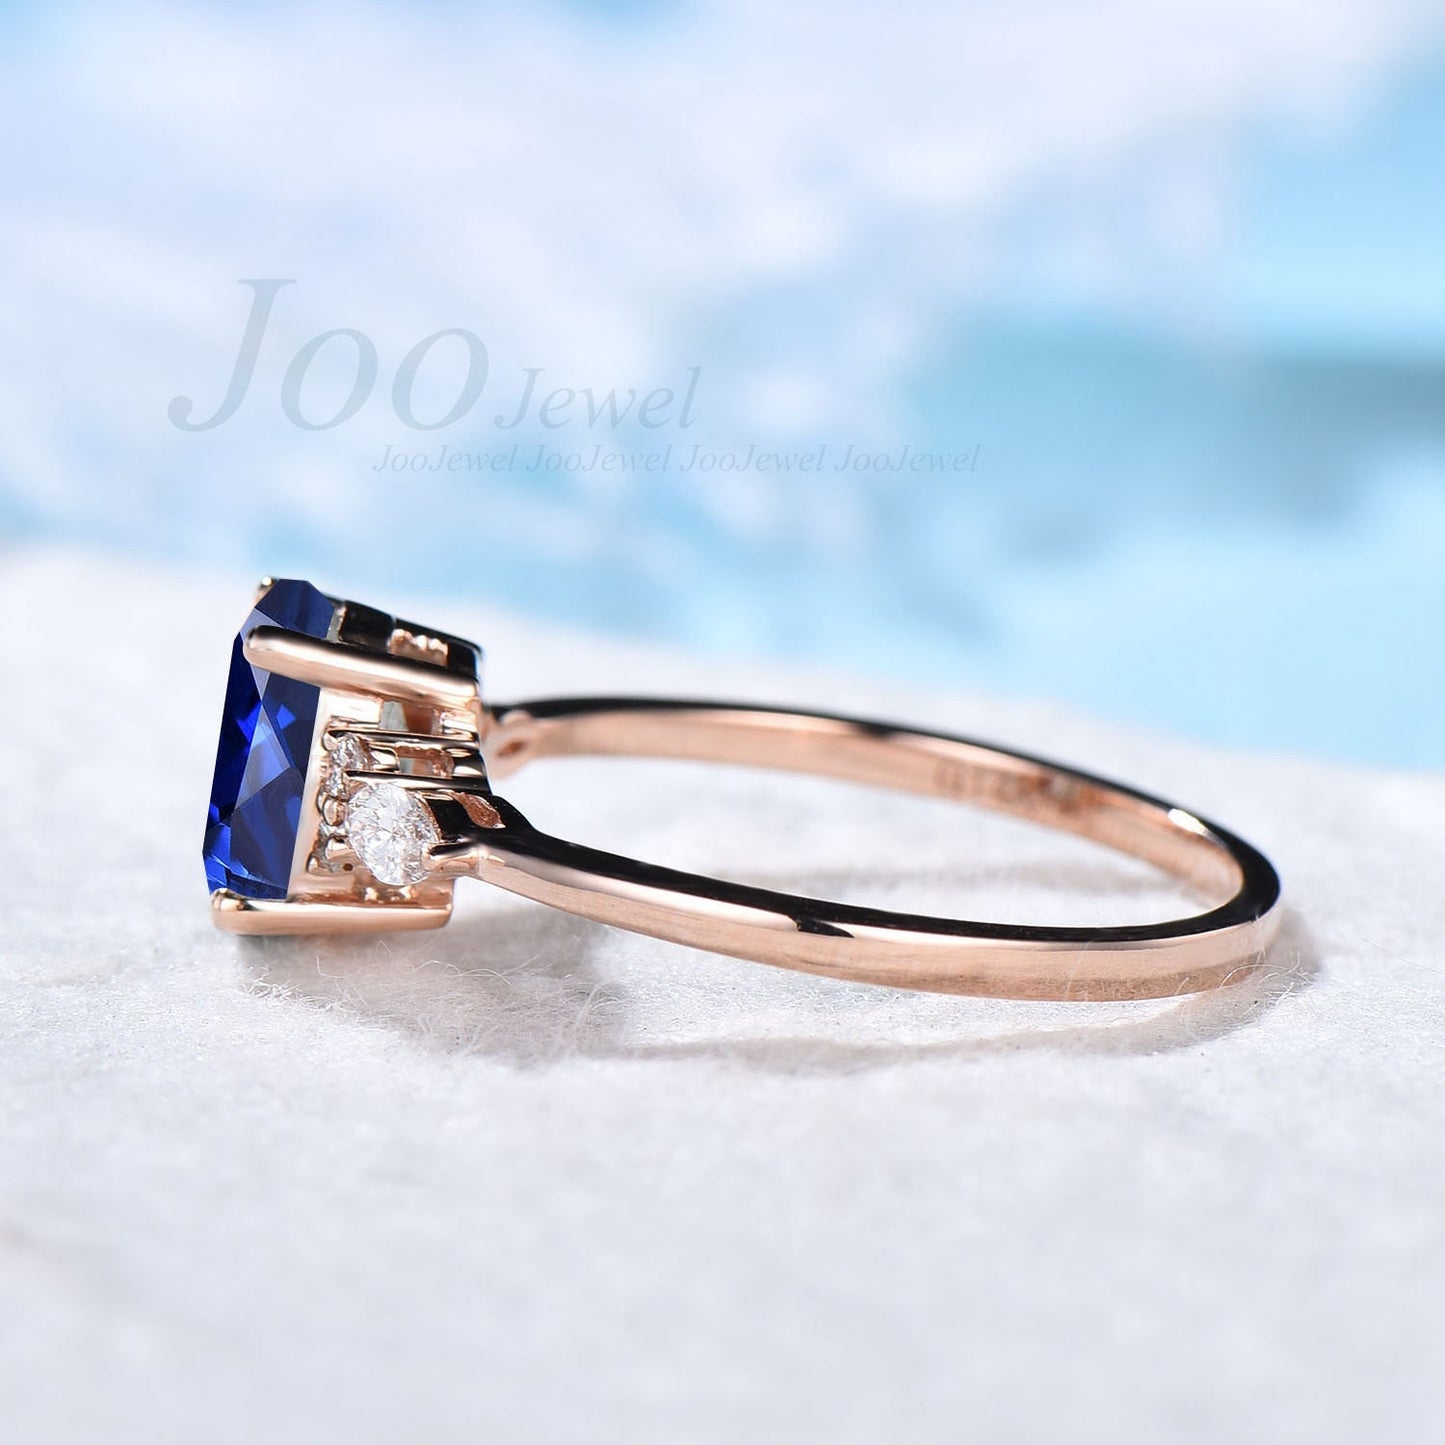 Oval Cut 1.5ct Blue Sapphire Ring Vintage Sterling Silver Blue Engagement Ring Unique Anniversary Ring September Birthstone Birthday Gift